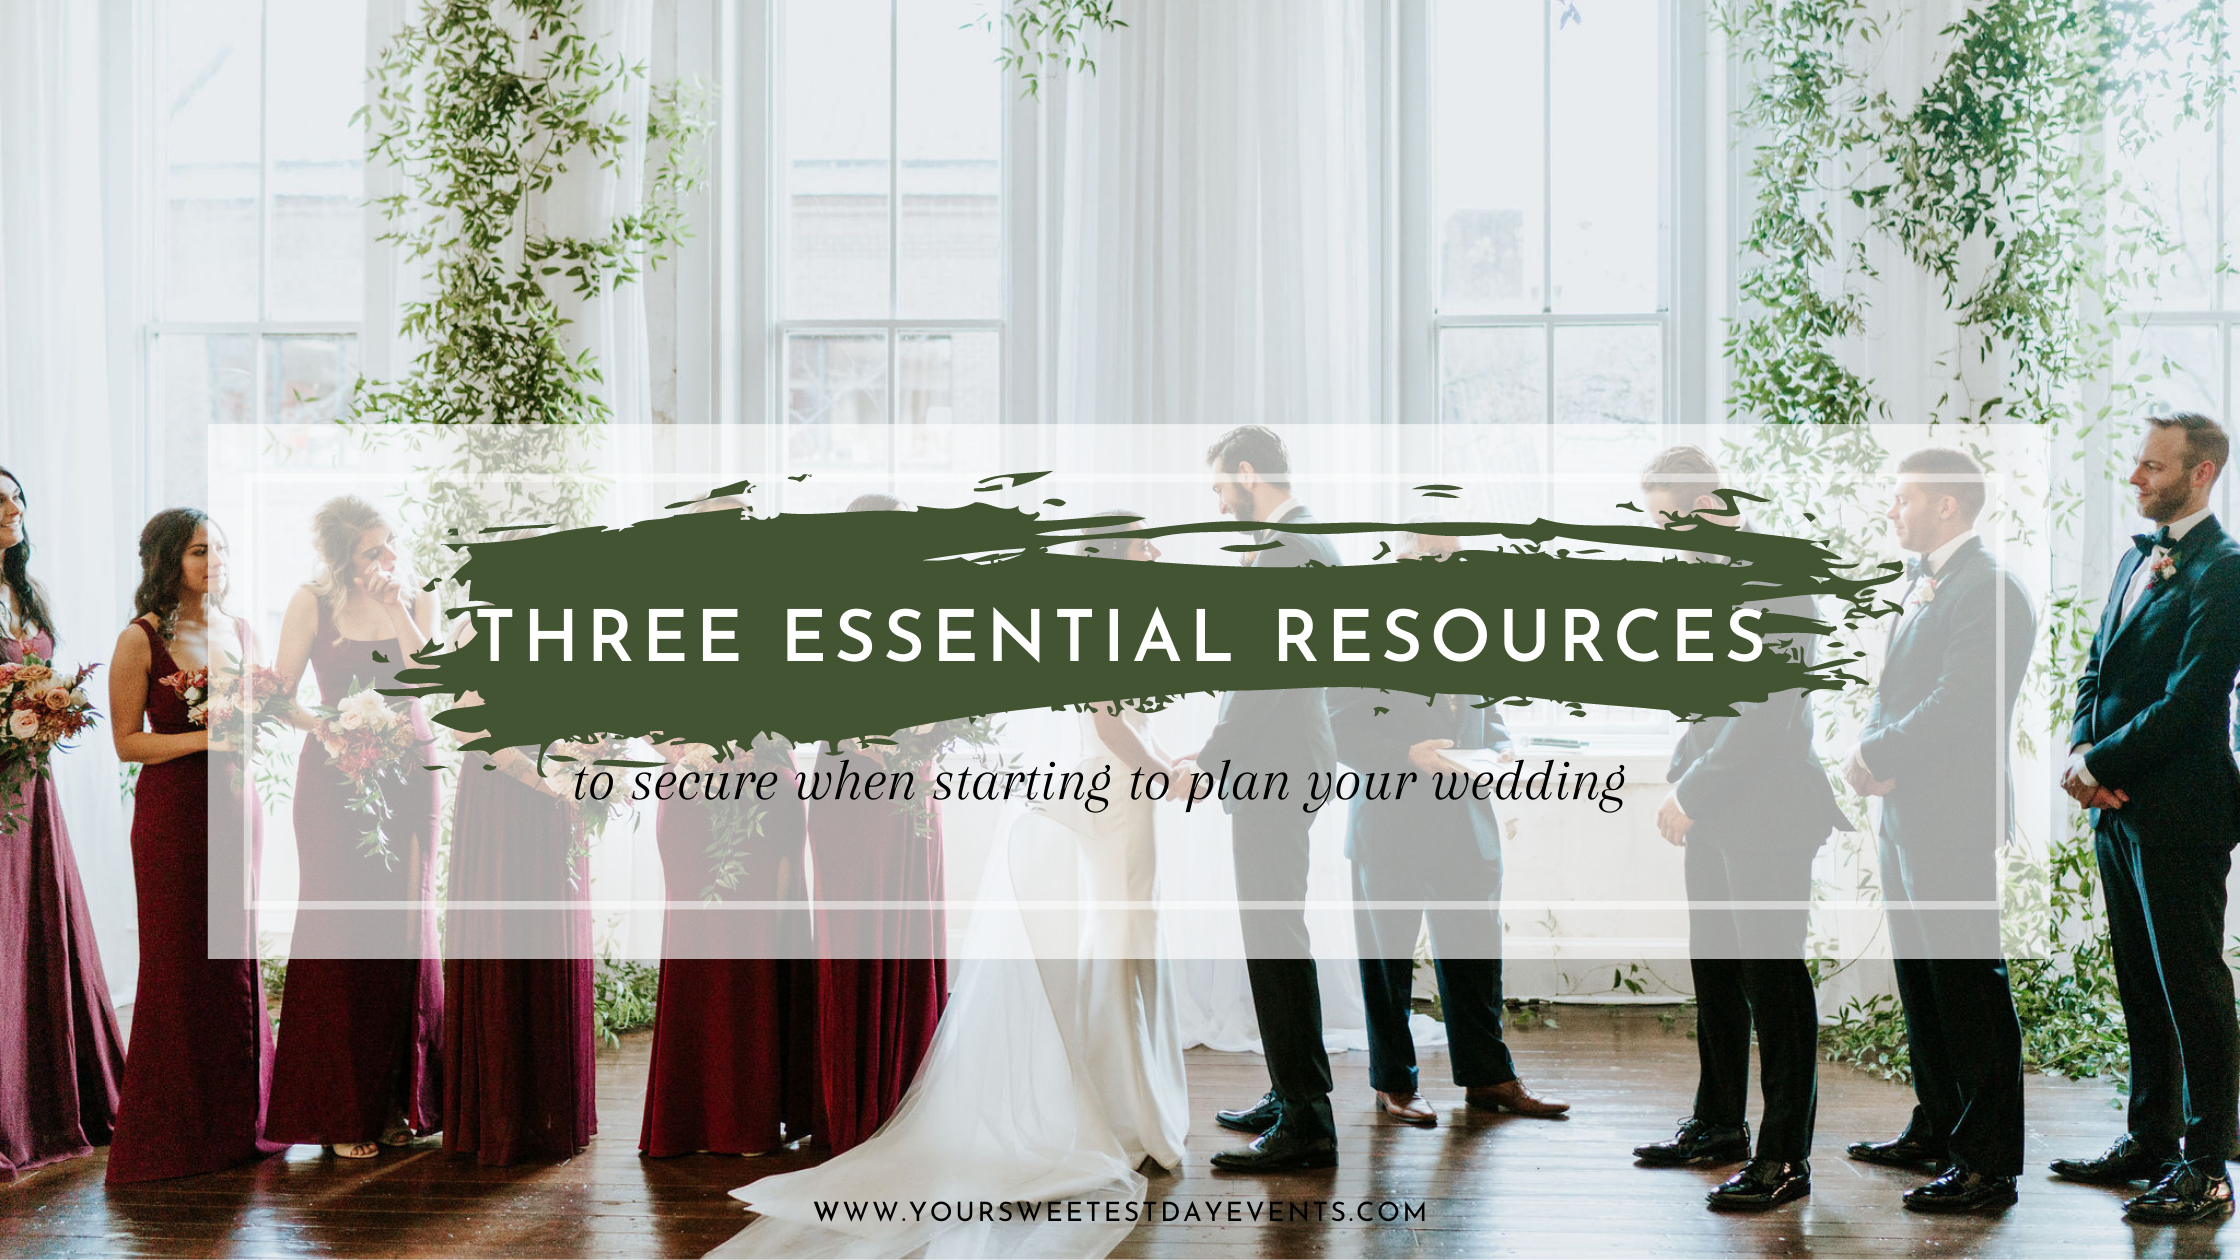 Three Essential Resources To Secure When Starting To Plan A Wedding | Your Sweetest Day Events| If you are just getting started with planning your wedding, perhaps you feel overwhelmed by the act of just getting started. Maybe you are wondering where do I find a reliable resource to guide me through the process? How do I ensure I don’t overlook any details? We've got you covered, we’re sharing our Getting Started Recipe for Planning Success! It’s simple, easy-to-follow & in true planner fashion, leaves no stone unturned! Read more here. #weddingplanning #planningtipsandtricks #wedding